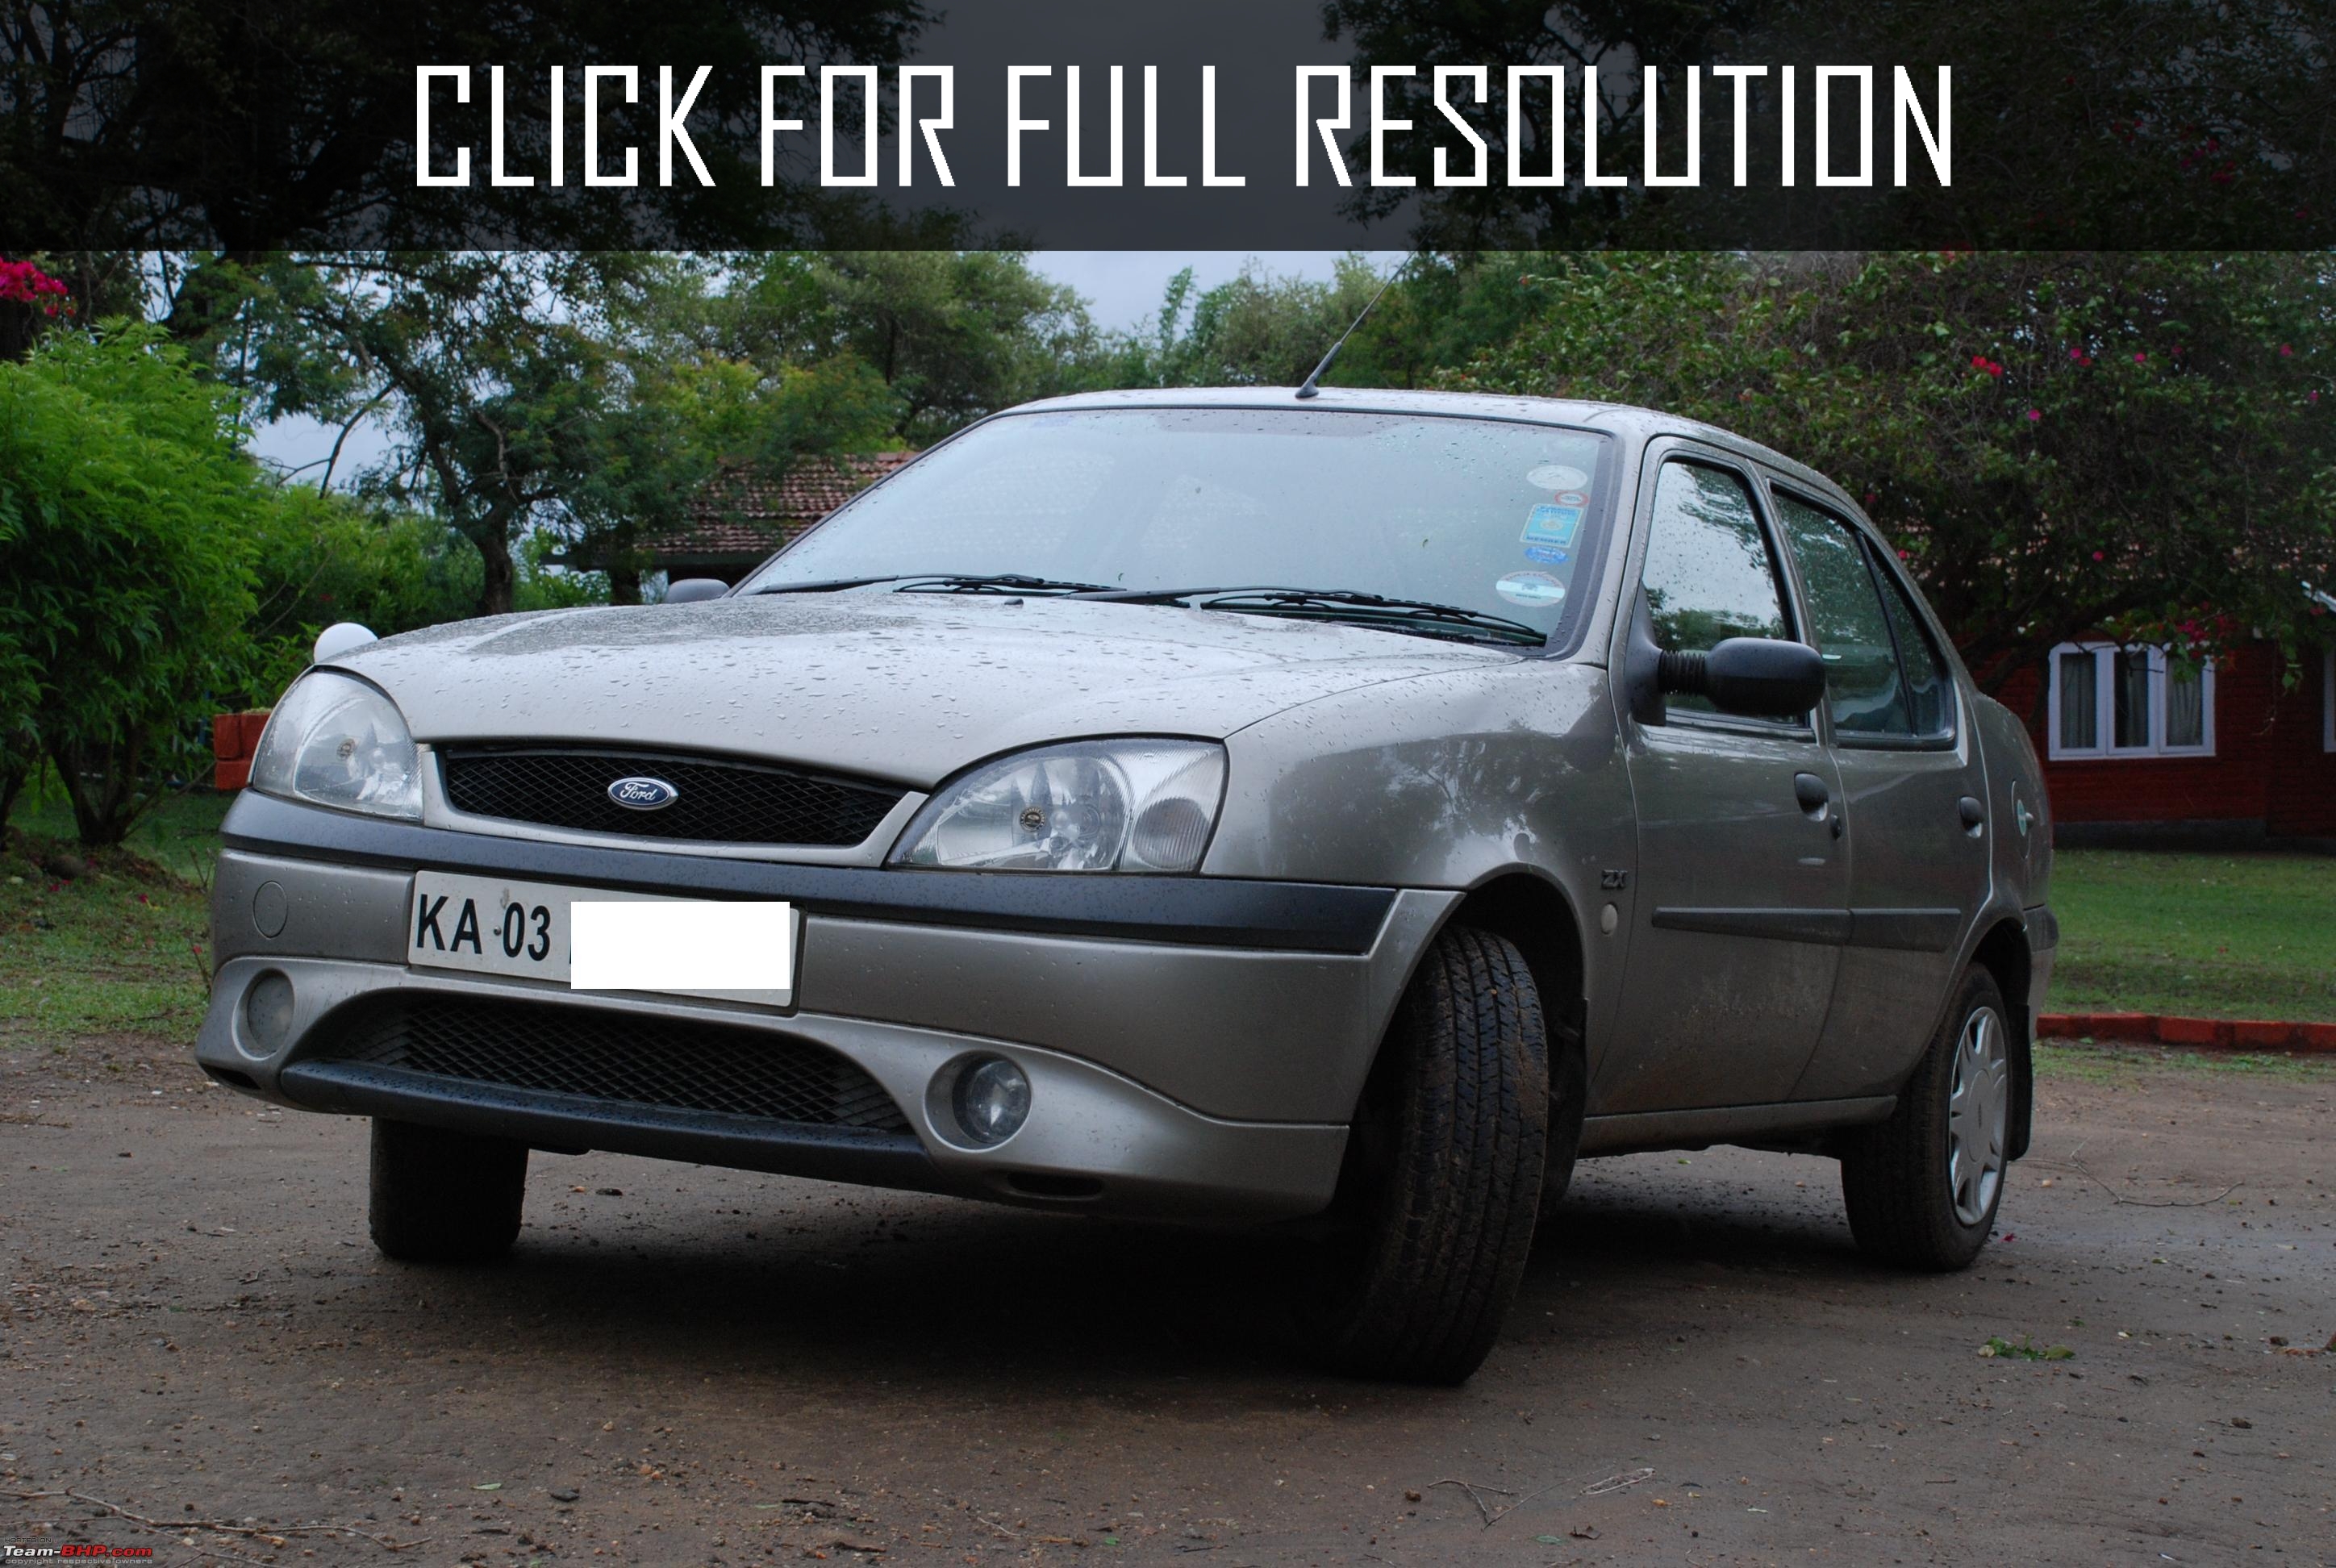 Ford Ikon 1.6 - reviews, prices, ratings with various photos2896 x 1944